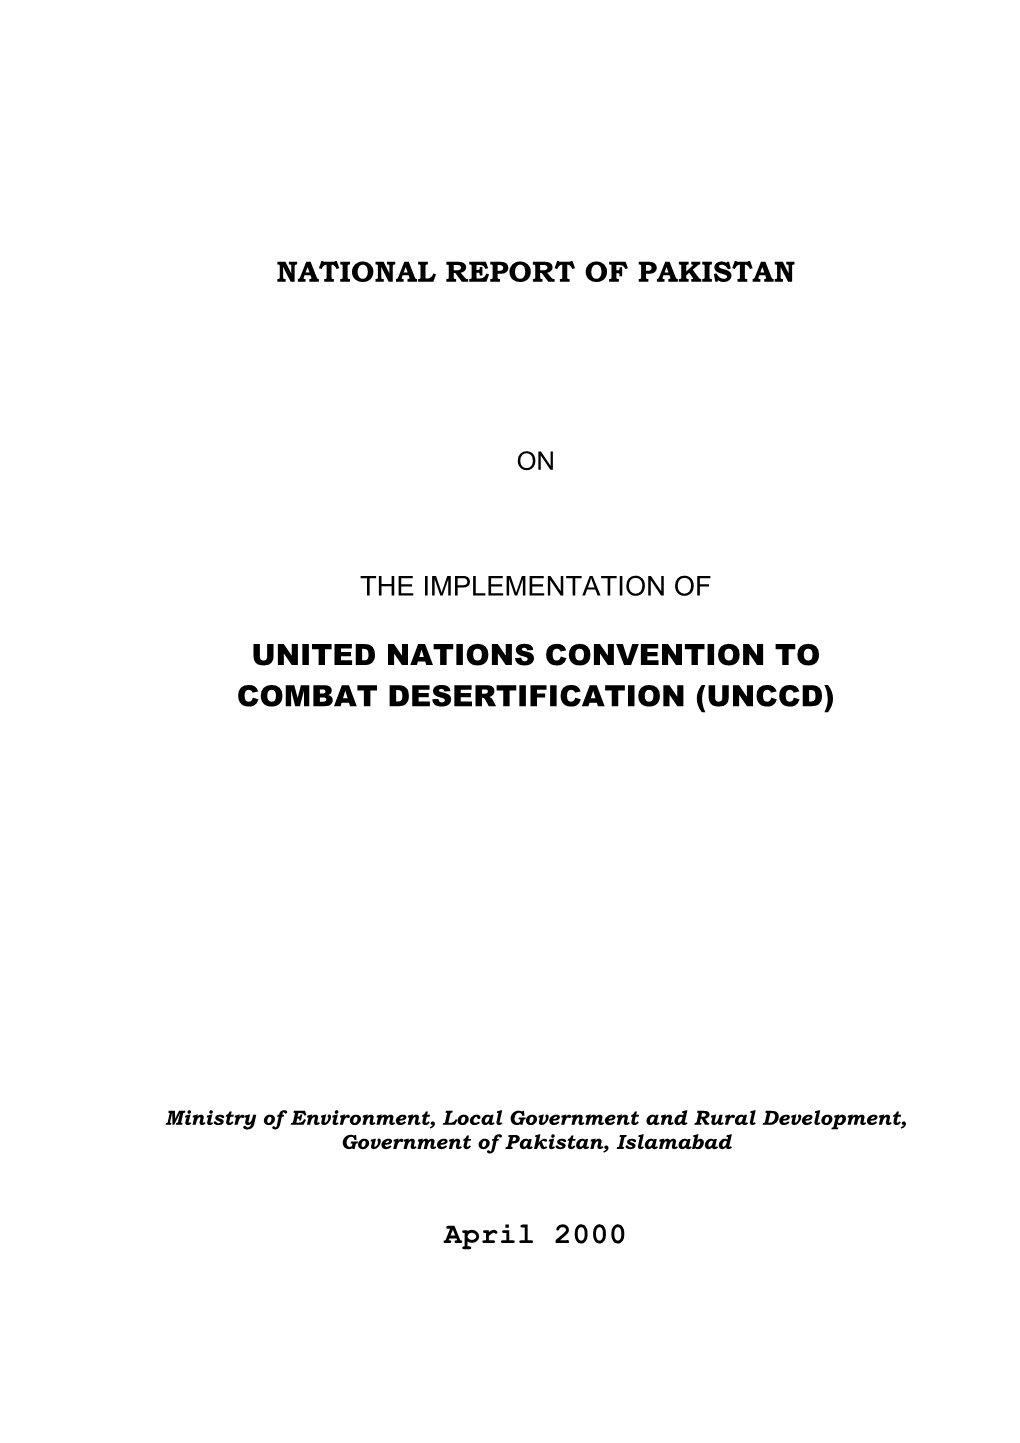 NATIONAL REPORT of PAKISTAN UNITED NATIONS CONVENTION to COMBAT DESERTIFICATION (UNCCD) April 2000